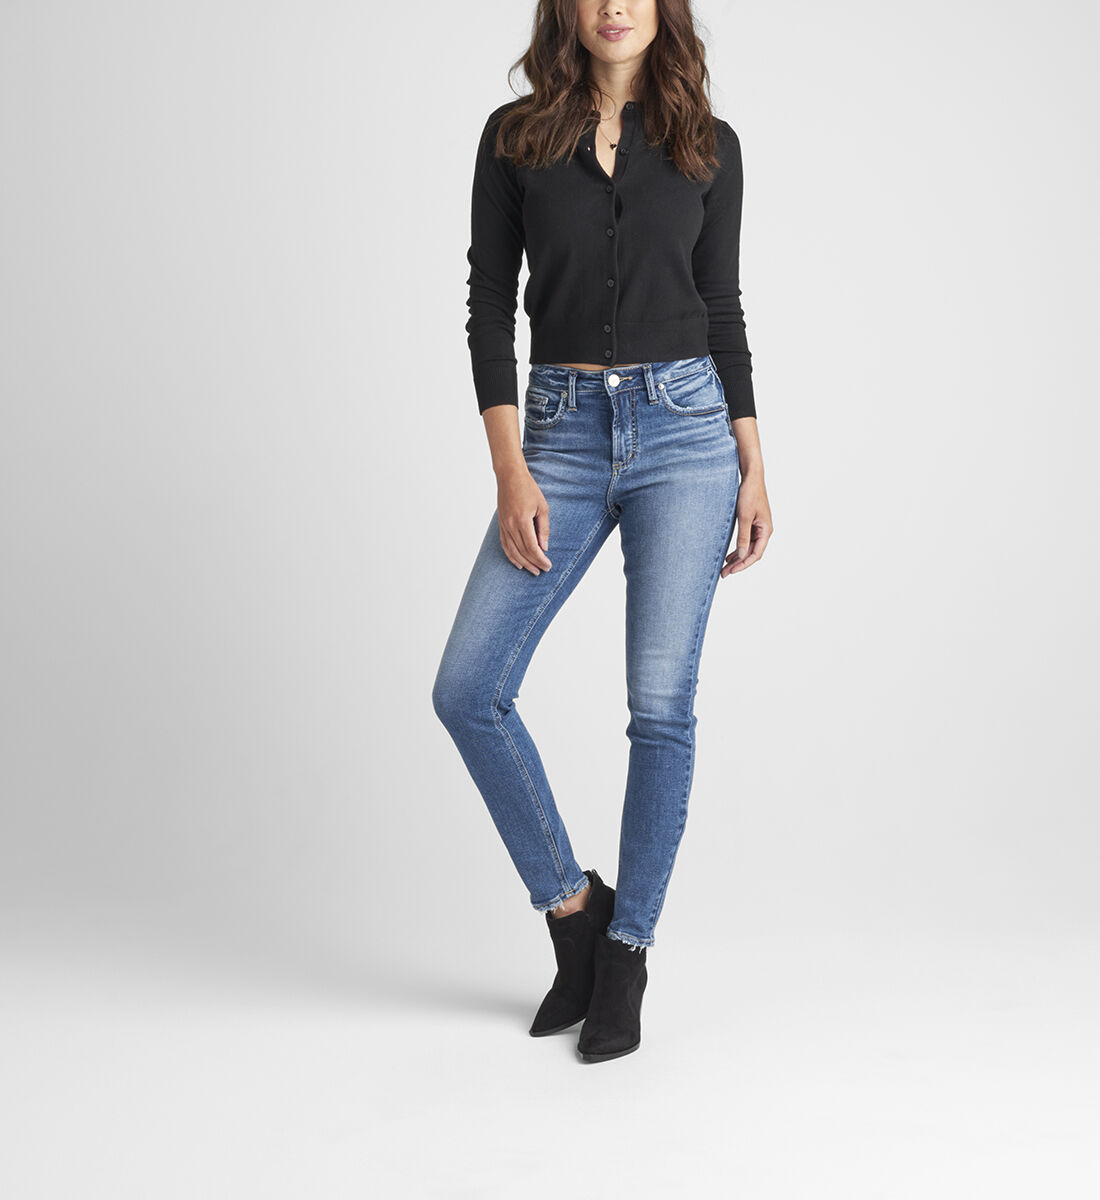 Women's High Rise Jeans | Silver Jeans Co.